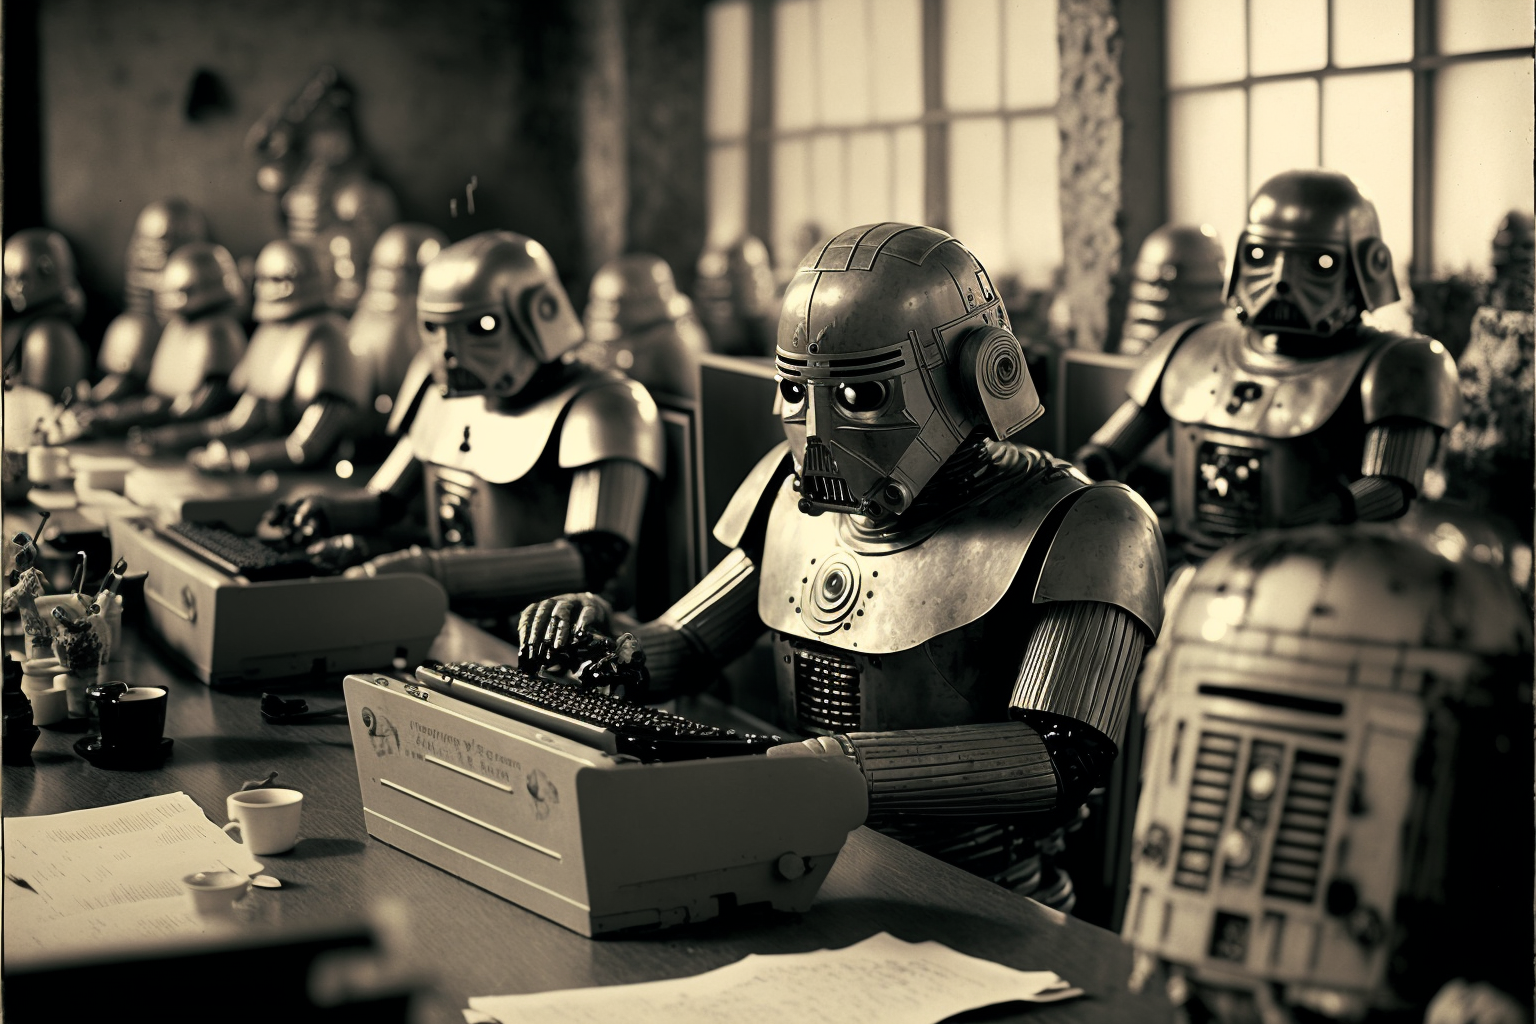 A robot sits in the foreground, typing on a weird typewriter. There are rows of more robots, all typing.